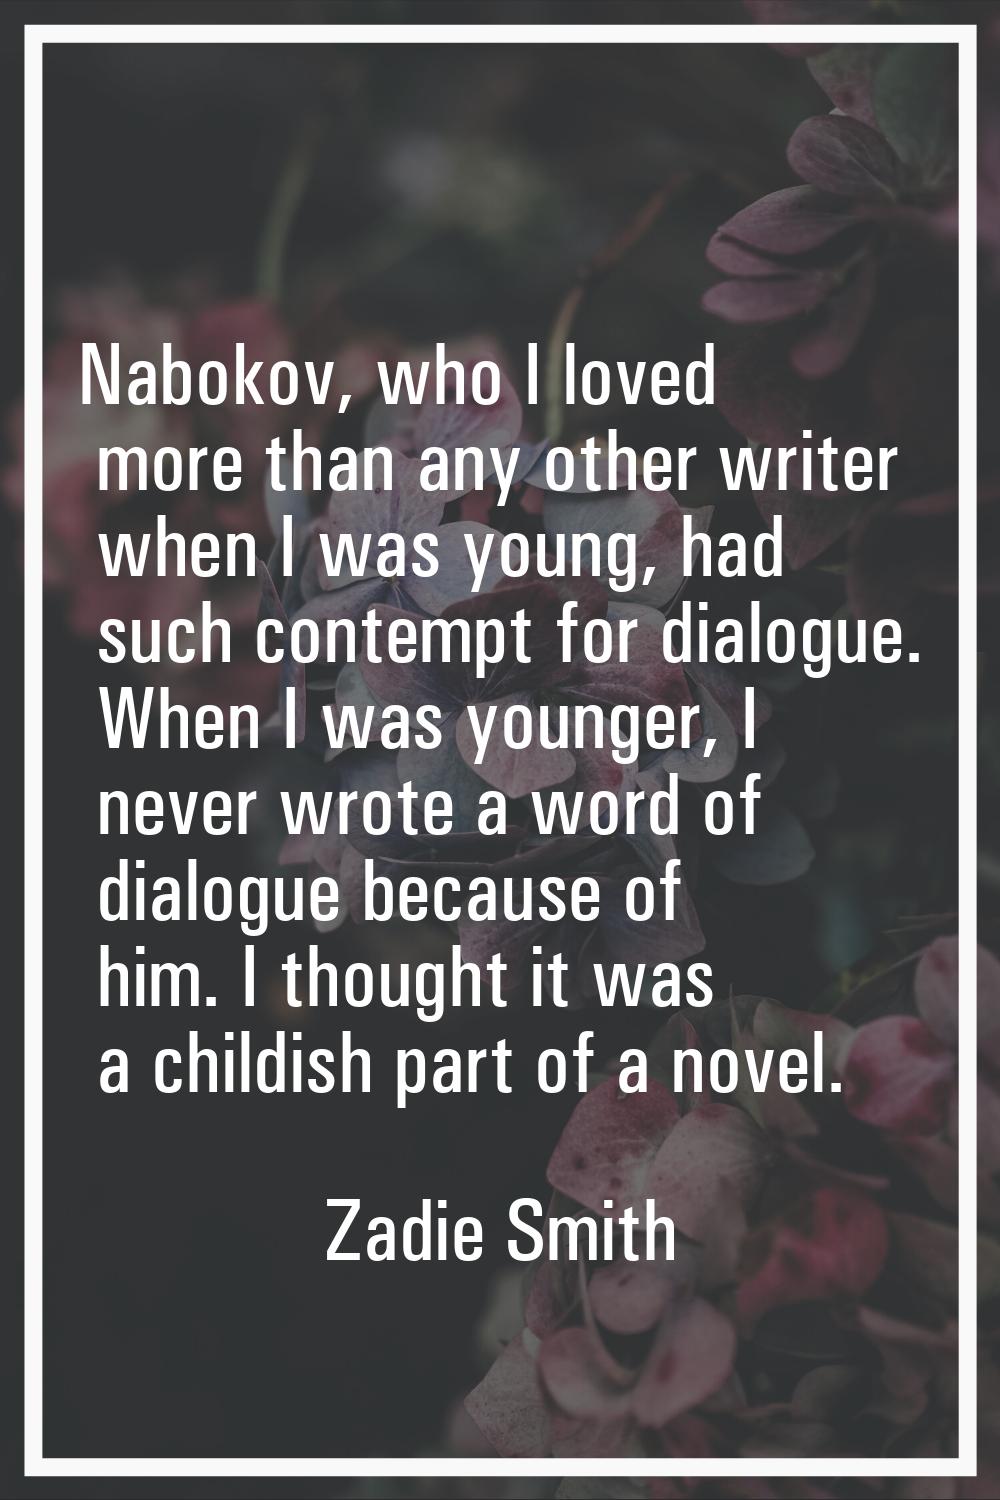 Nabokov, who I loved more than any other writer when I was young, had such contempt for dialogue. W